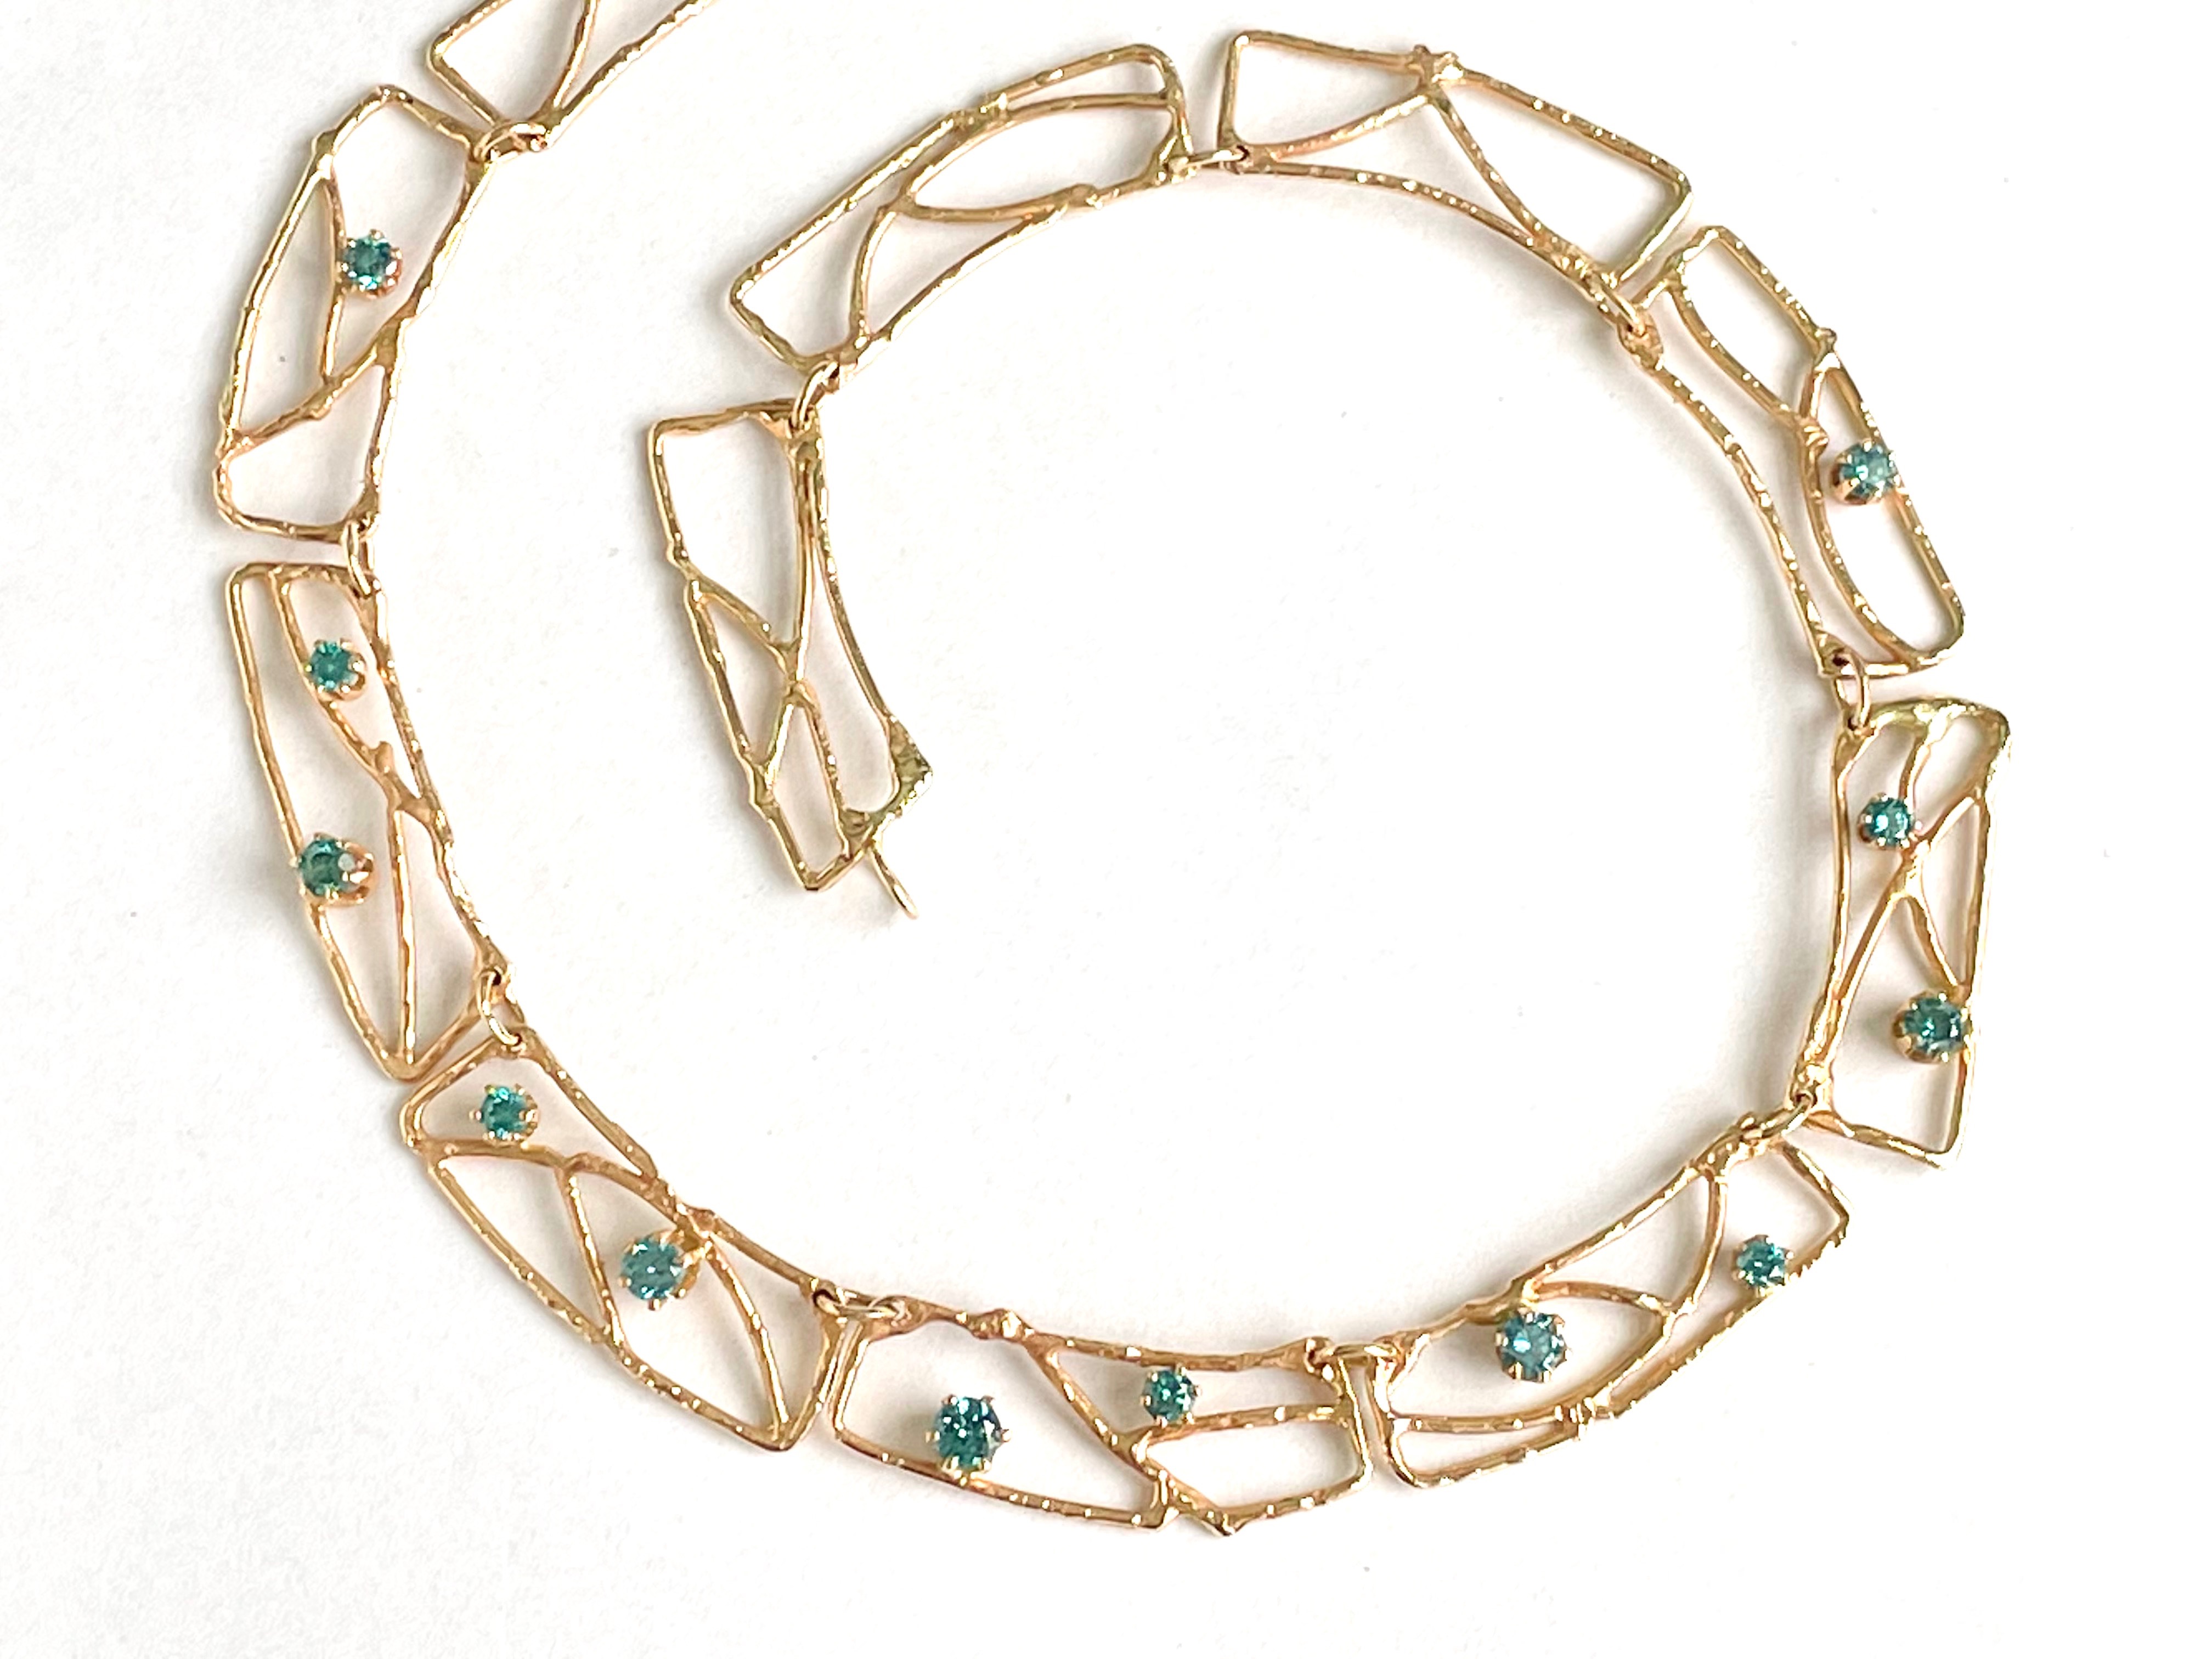 14k gold necklace with teal colored diamonds 231